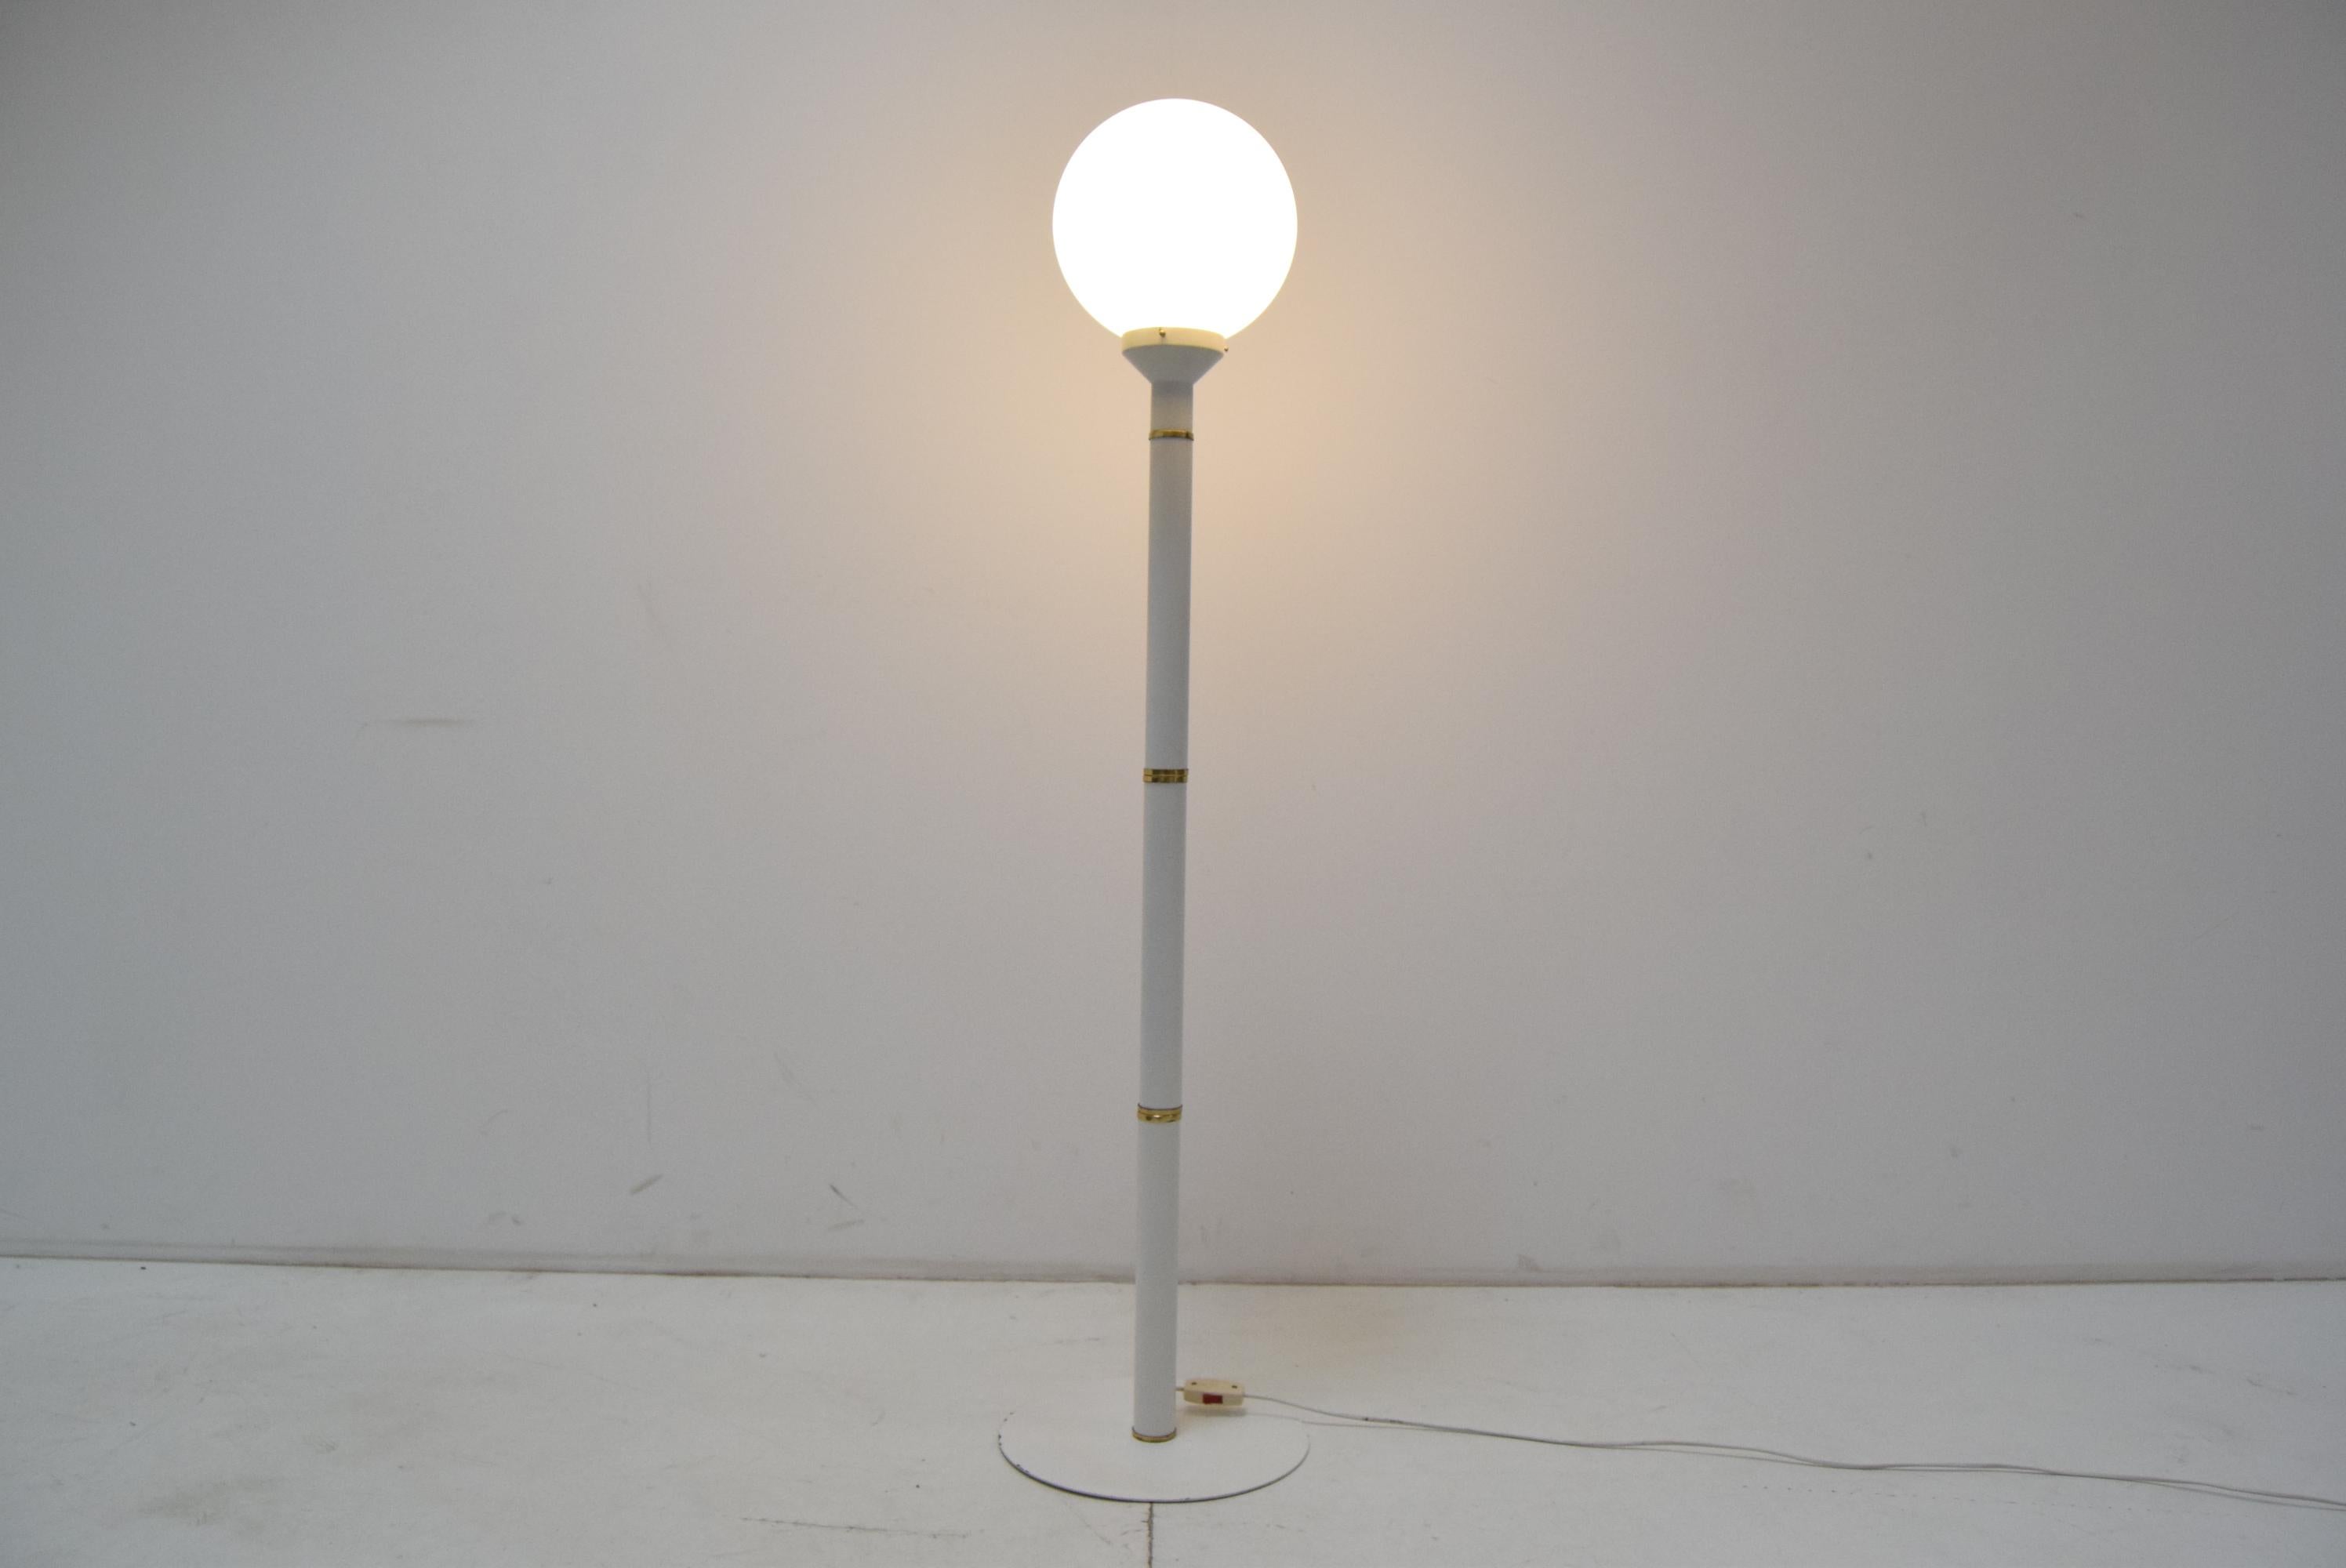 Made in Czechoslovakia
Made of milk glass, metal, brass
1xE27 or E26 bulb
At the request of the customer, it is possible to install a new electrical installation
With aged patina
US adapter included
Good original condition.